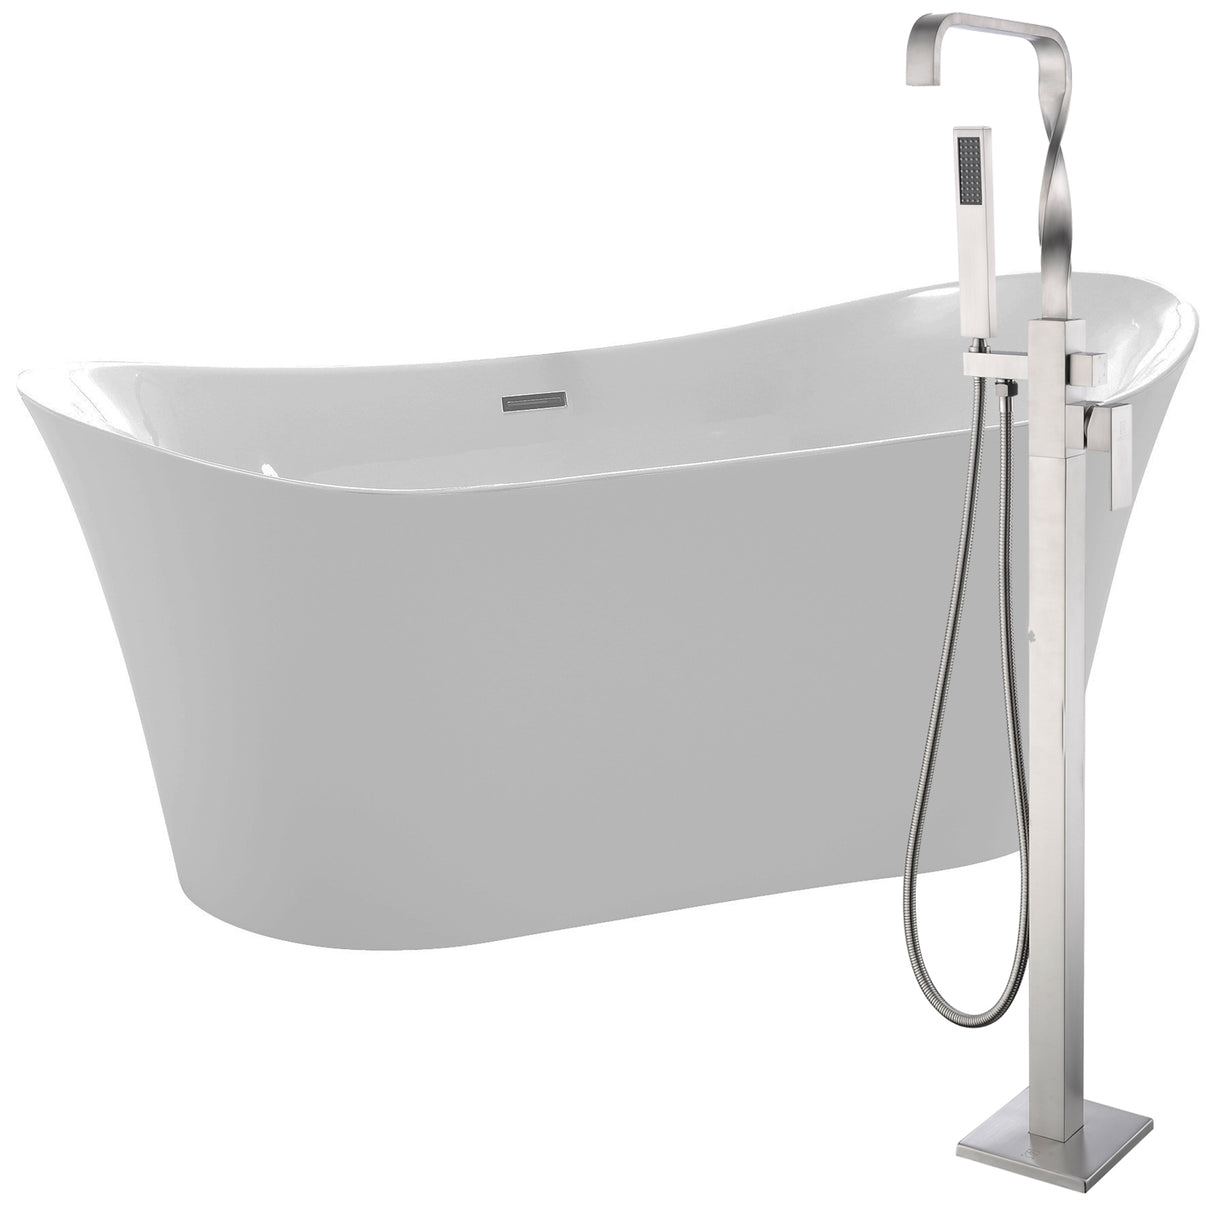 ANZZI FTAZ096-0050B Eft 67 in. Acrylic Flatbottom Non-Whirlpool Bathtub in White with Yosemite Faucet in Brushed Nickel